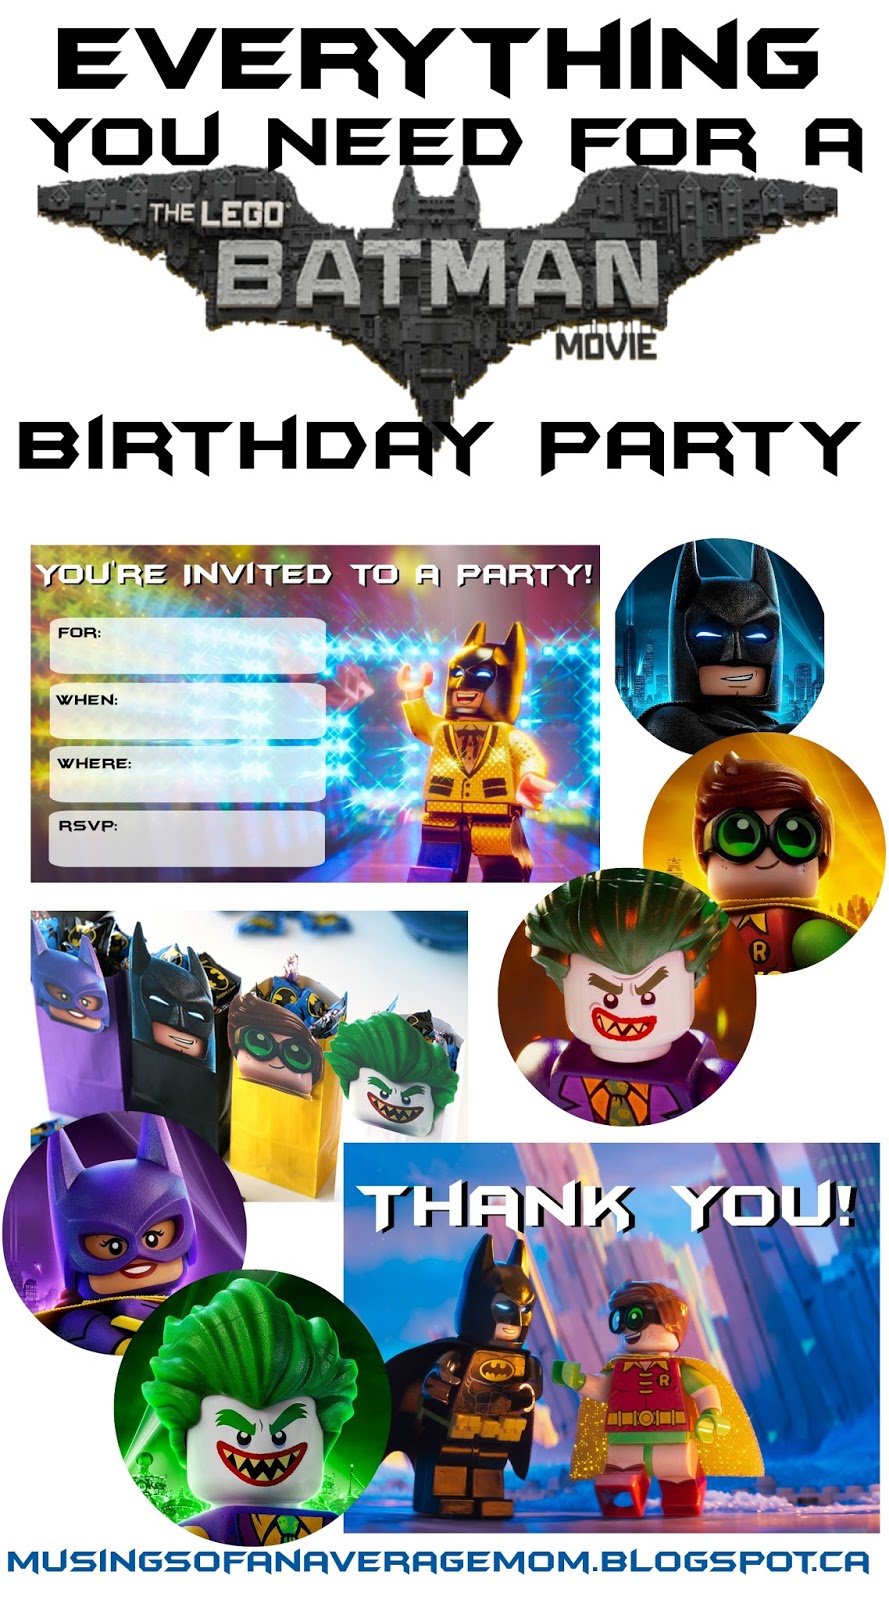 Musings of an Average Mom: Everything you need for a Lego Batman Party